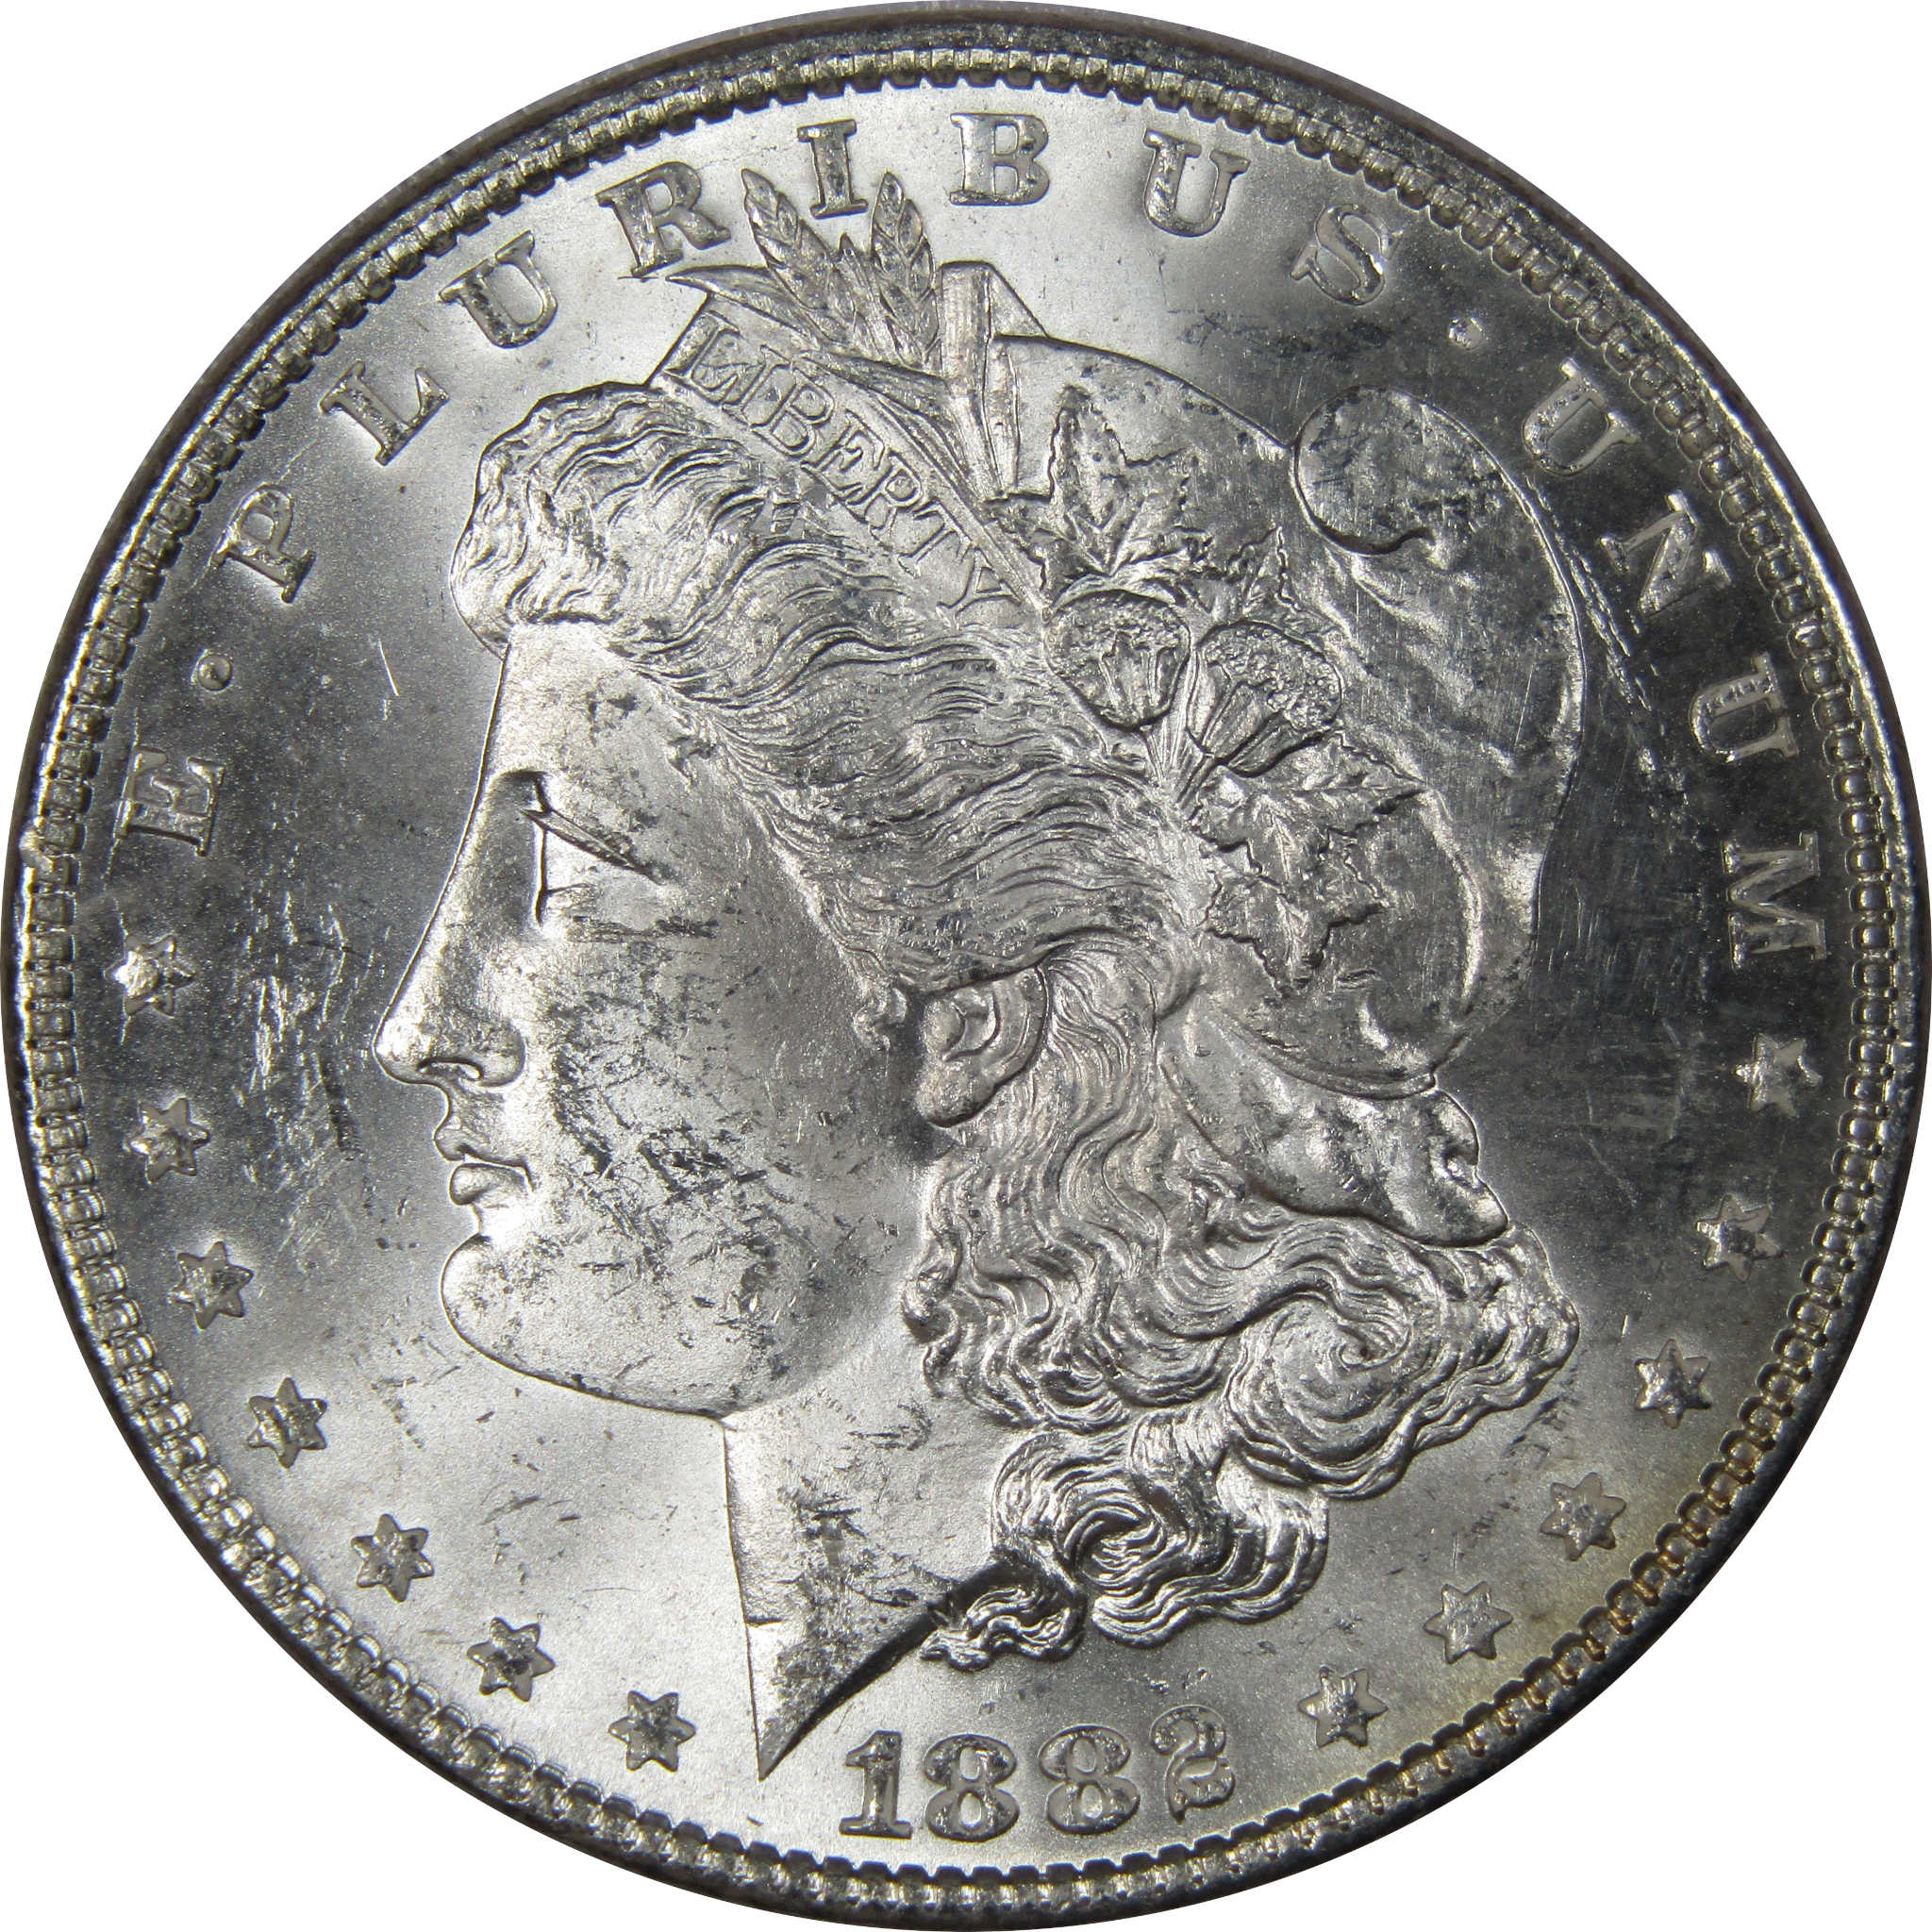 1882 Morgan Dollar BU Uncirculated Mint State 90% Silver SKU:IPC9652 - Morgan coin - Morgan silver dollar - Morgan silver dollar for sale - Profile Coins &amp; Collectibles